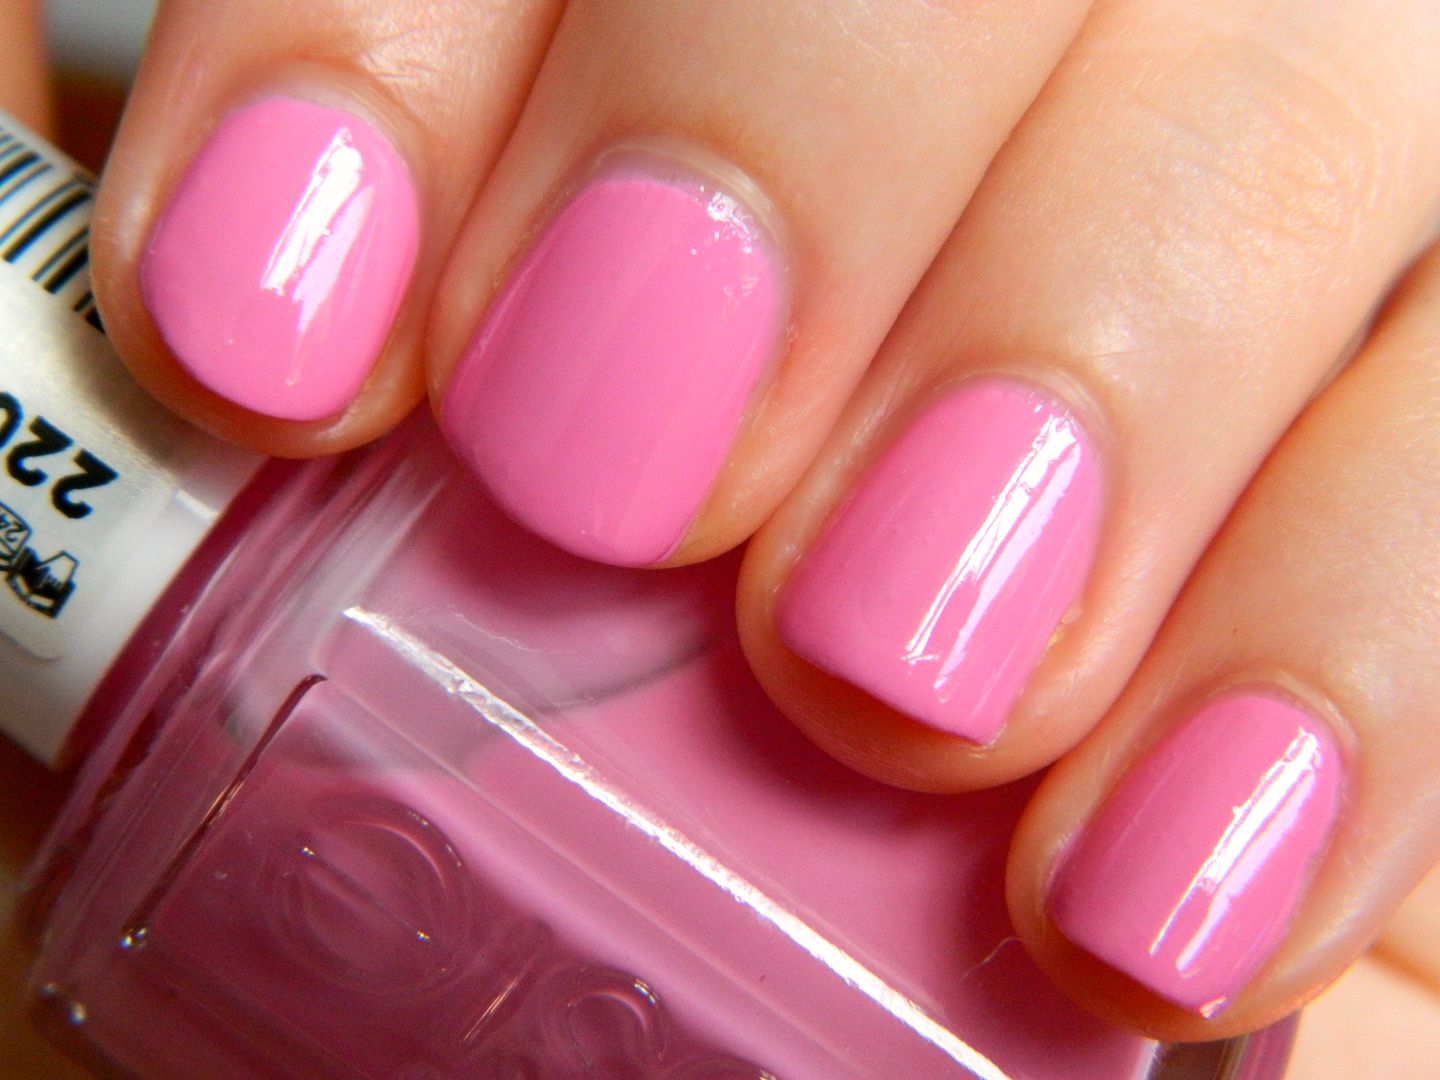 Nails Of the Day Essie Nail Lacquer Cascade Cool Swatch Belle-amie UK Beauty Fashion Lifestyle Blog